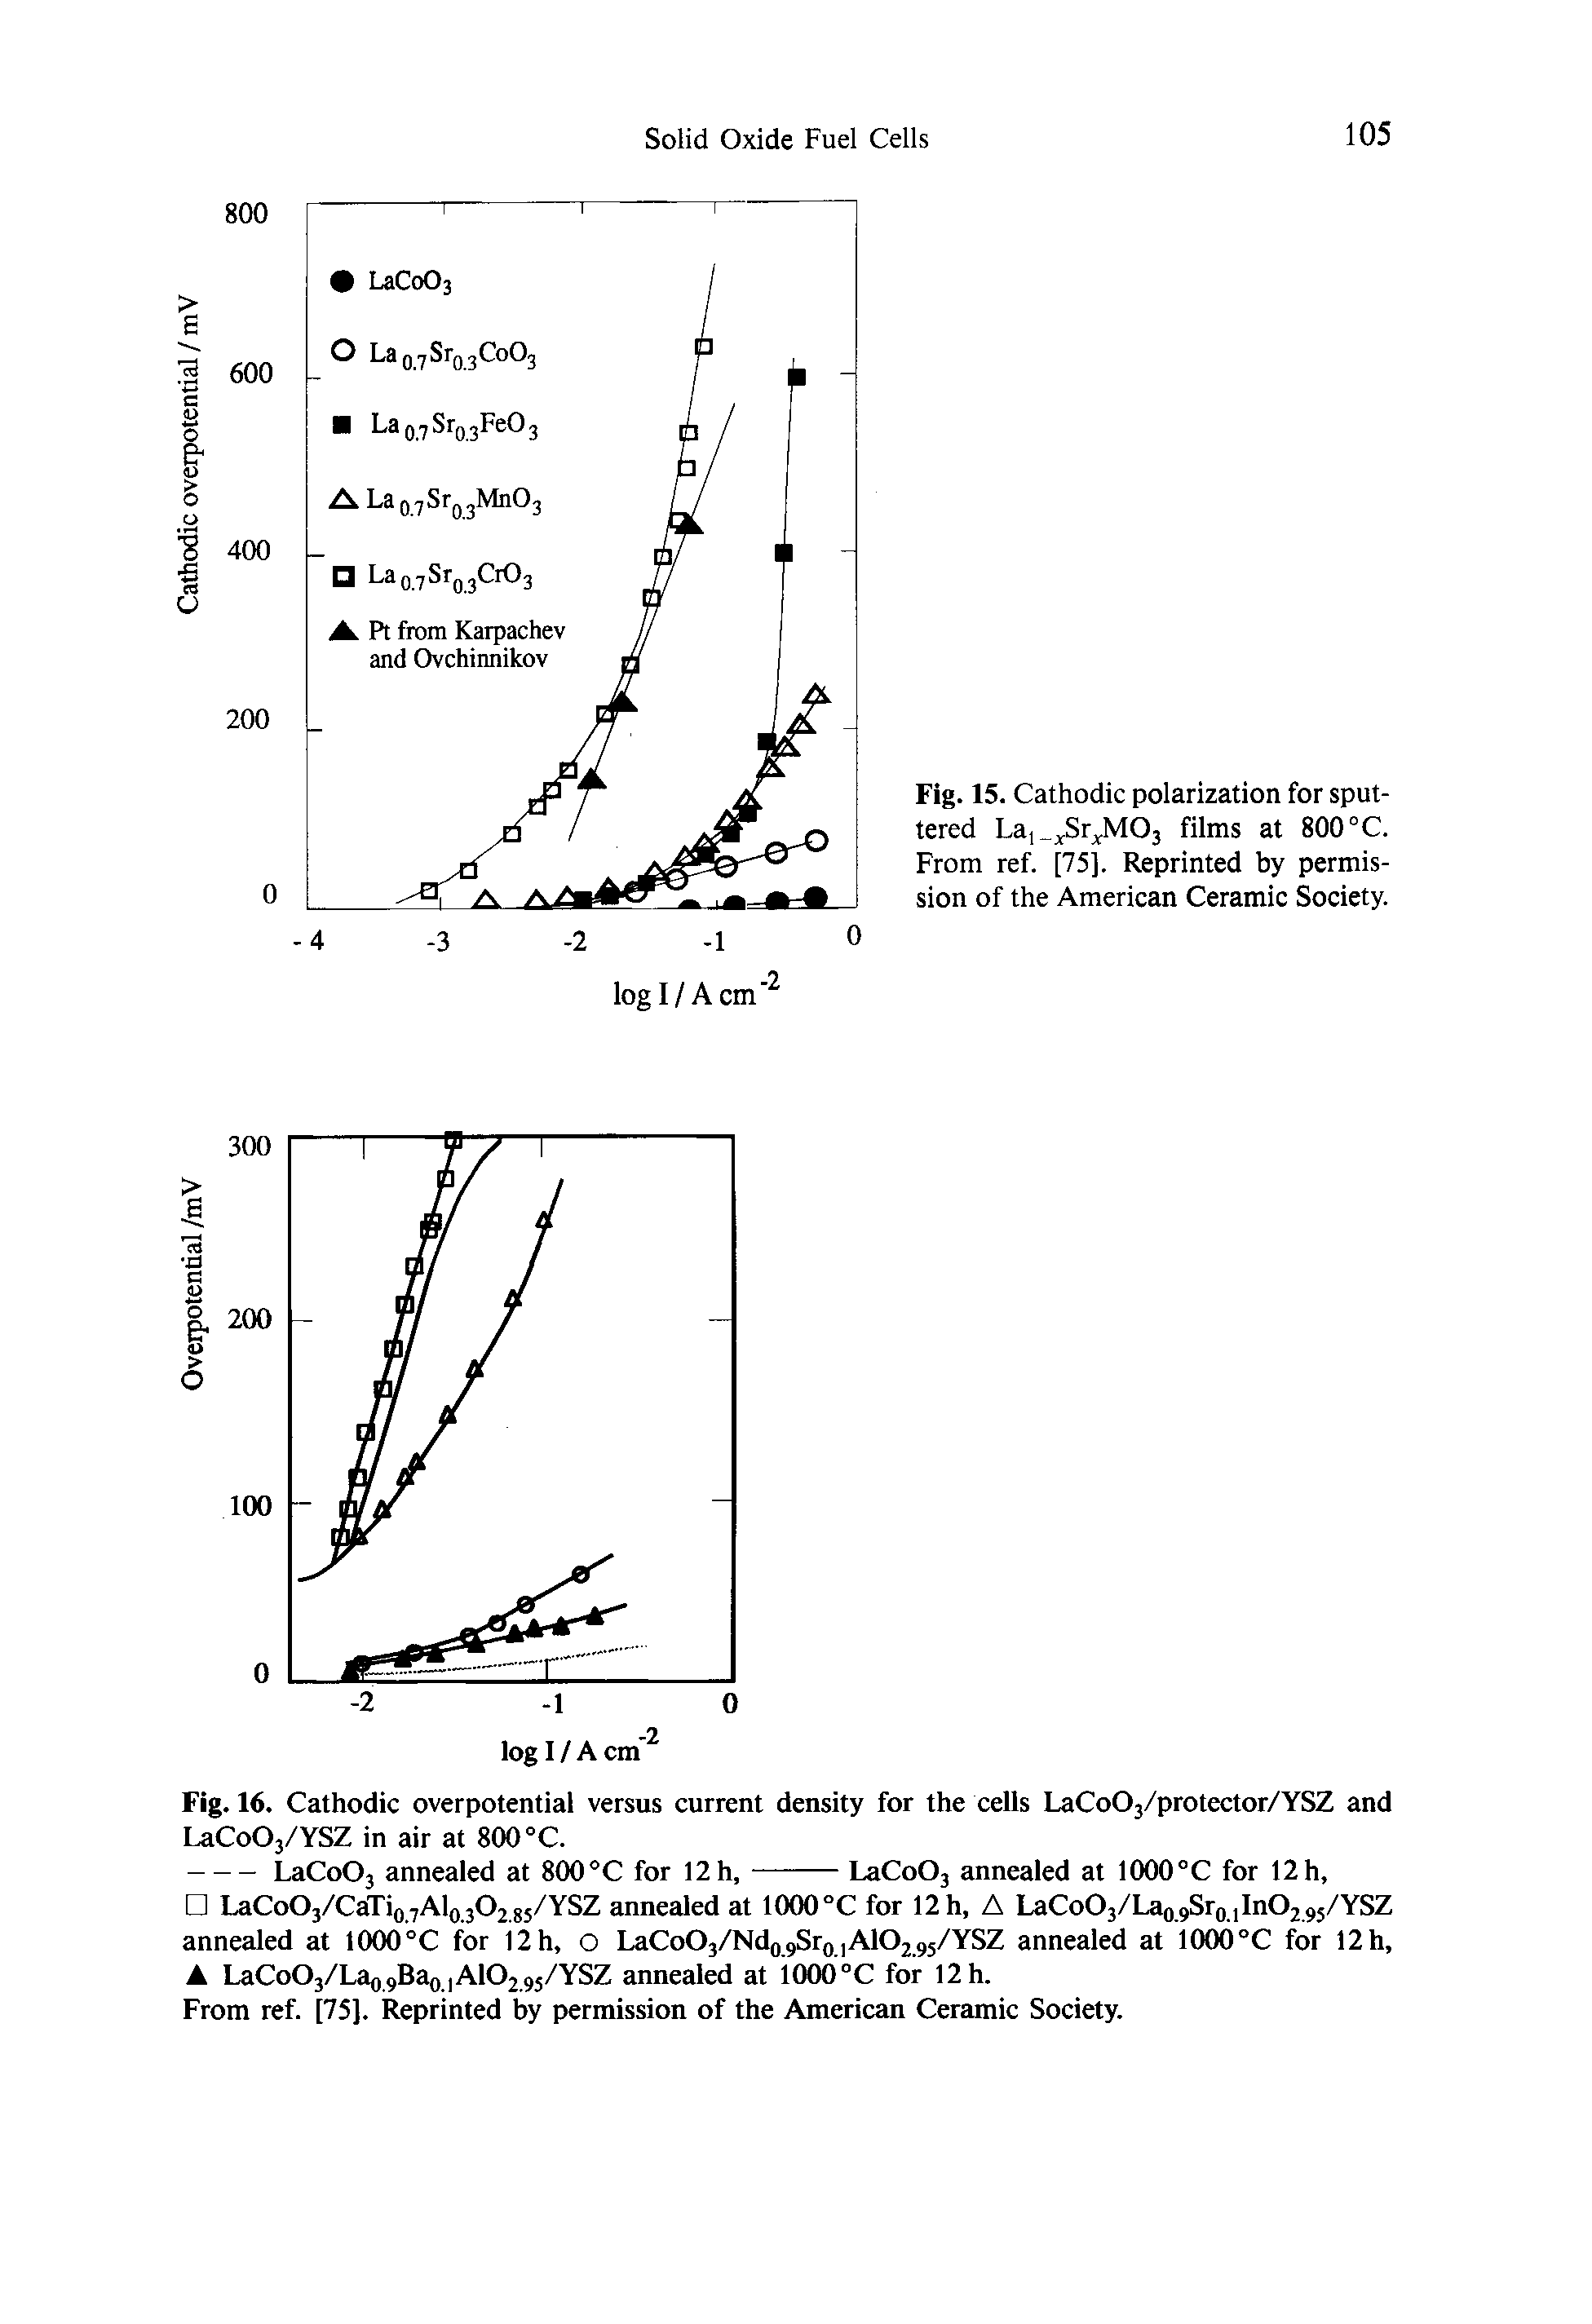 Fig. 16. Cathodic overpotential versus current density for the cells LaCoOj/protector/YSZ and LaCoOj/YSZ in air at 800 °C.